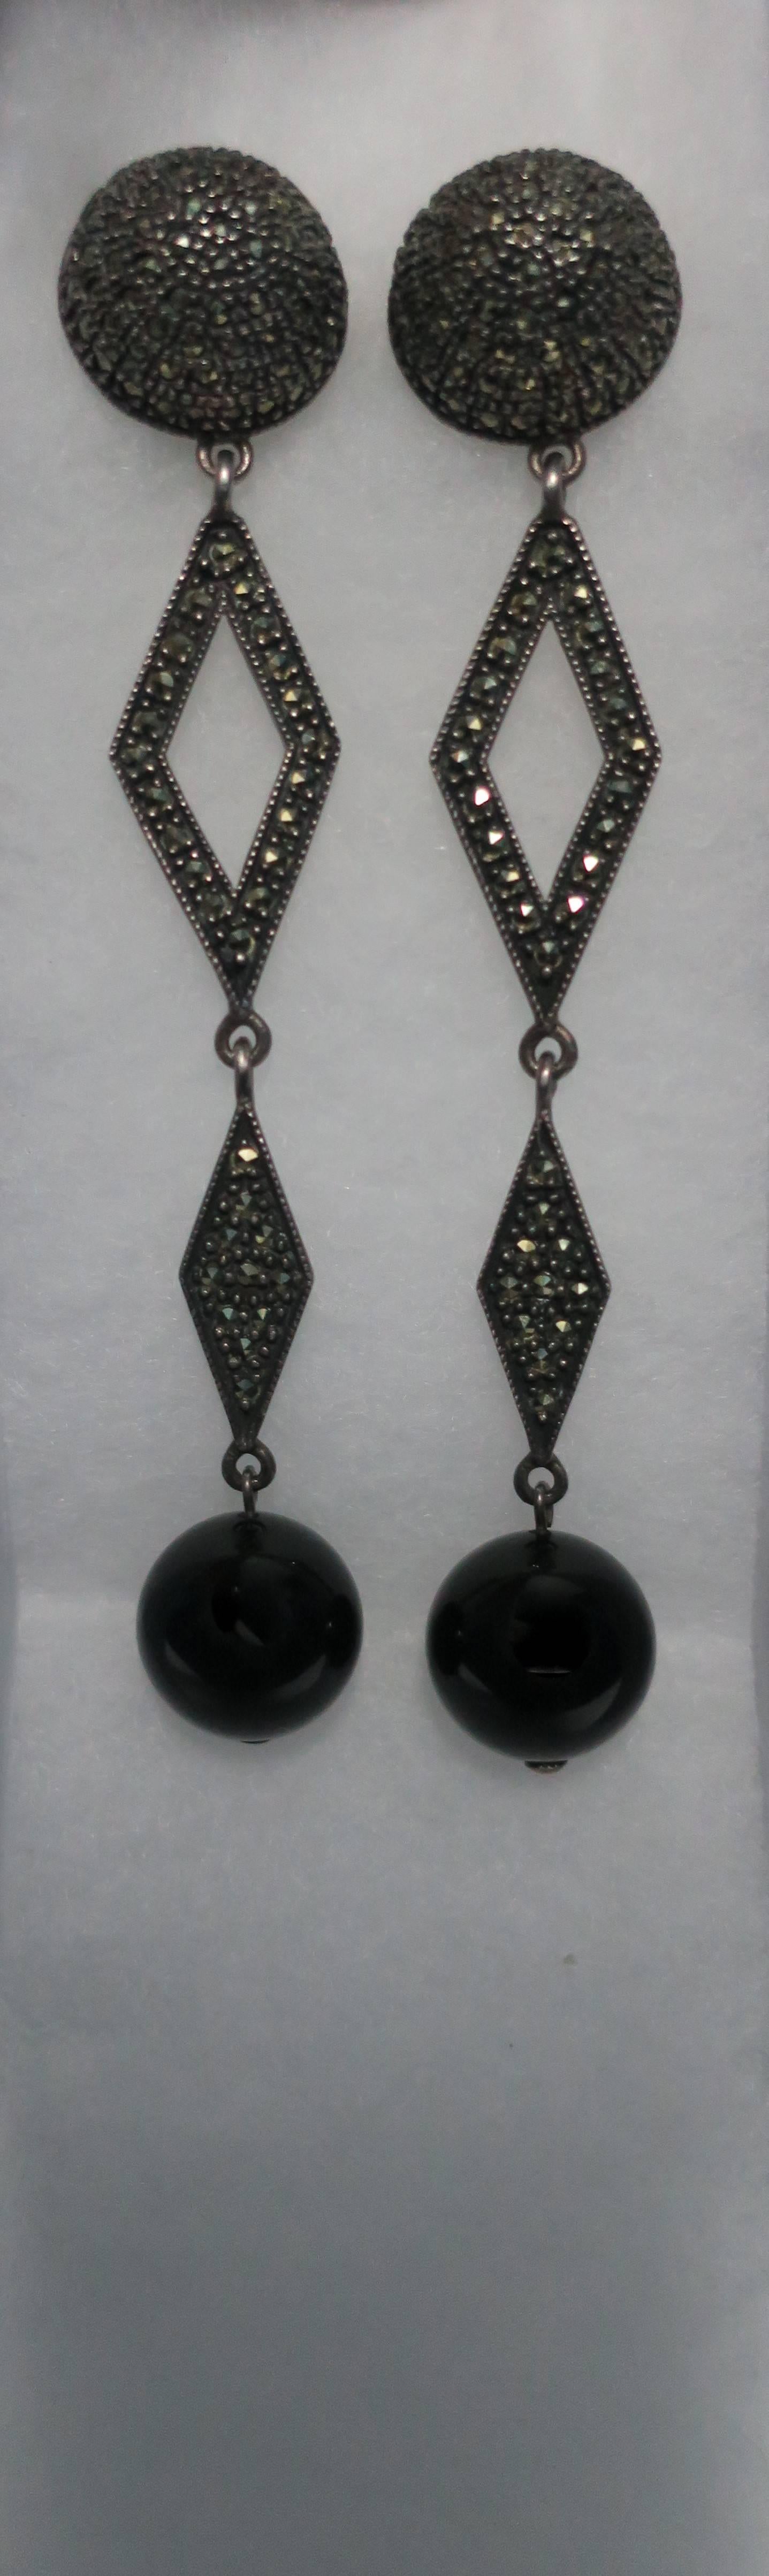 A striking and beautiful pair of long Art Deco style black onyx, sterling silver, and marcasite earrings. Earring are for pierced ears, and are light and comfortable to wear. Marked 'Sterling' on back. 

Measures 3.75 inches long. 